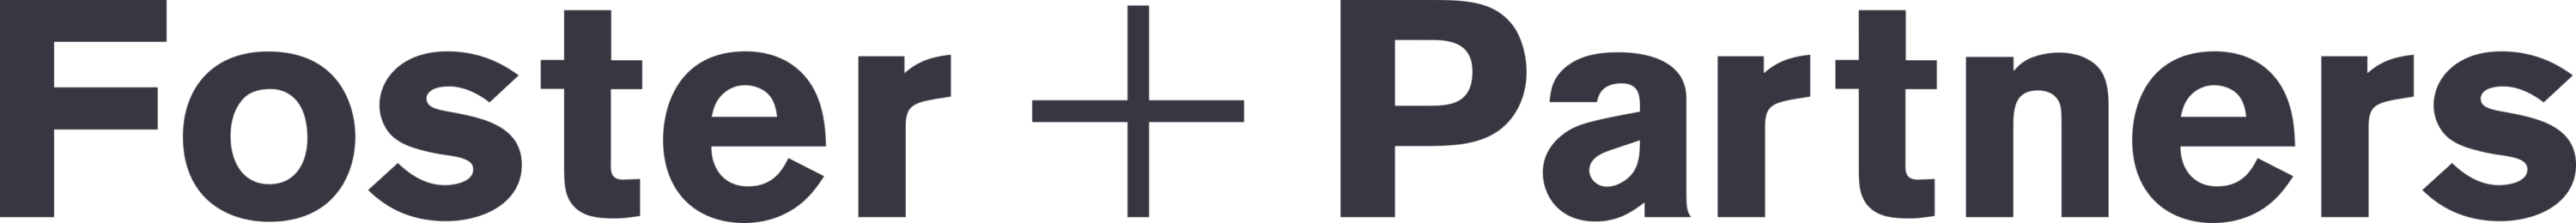 Foster and Partners Logo